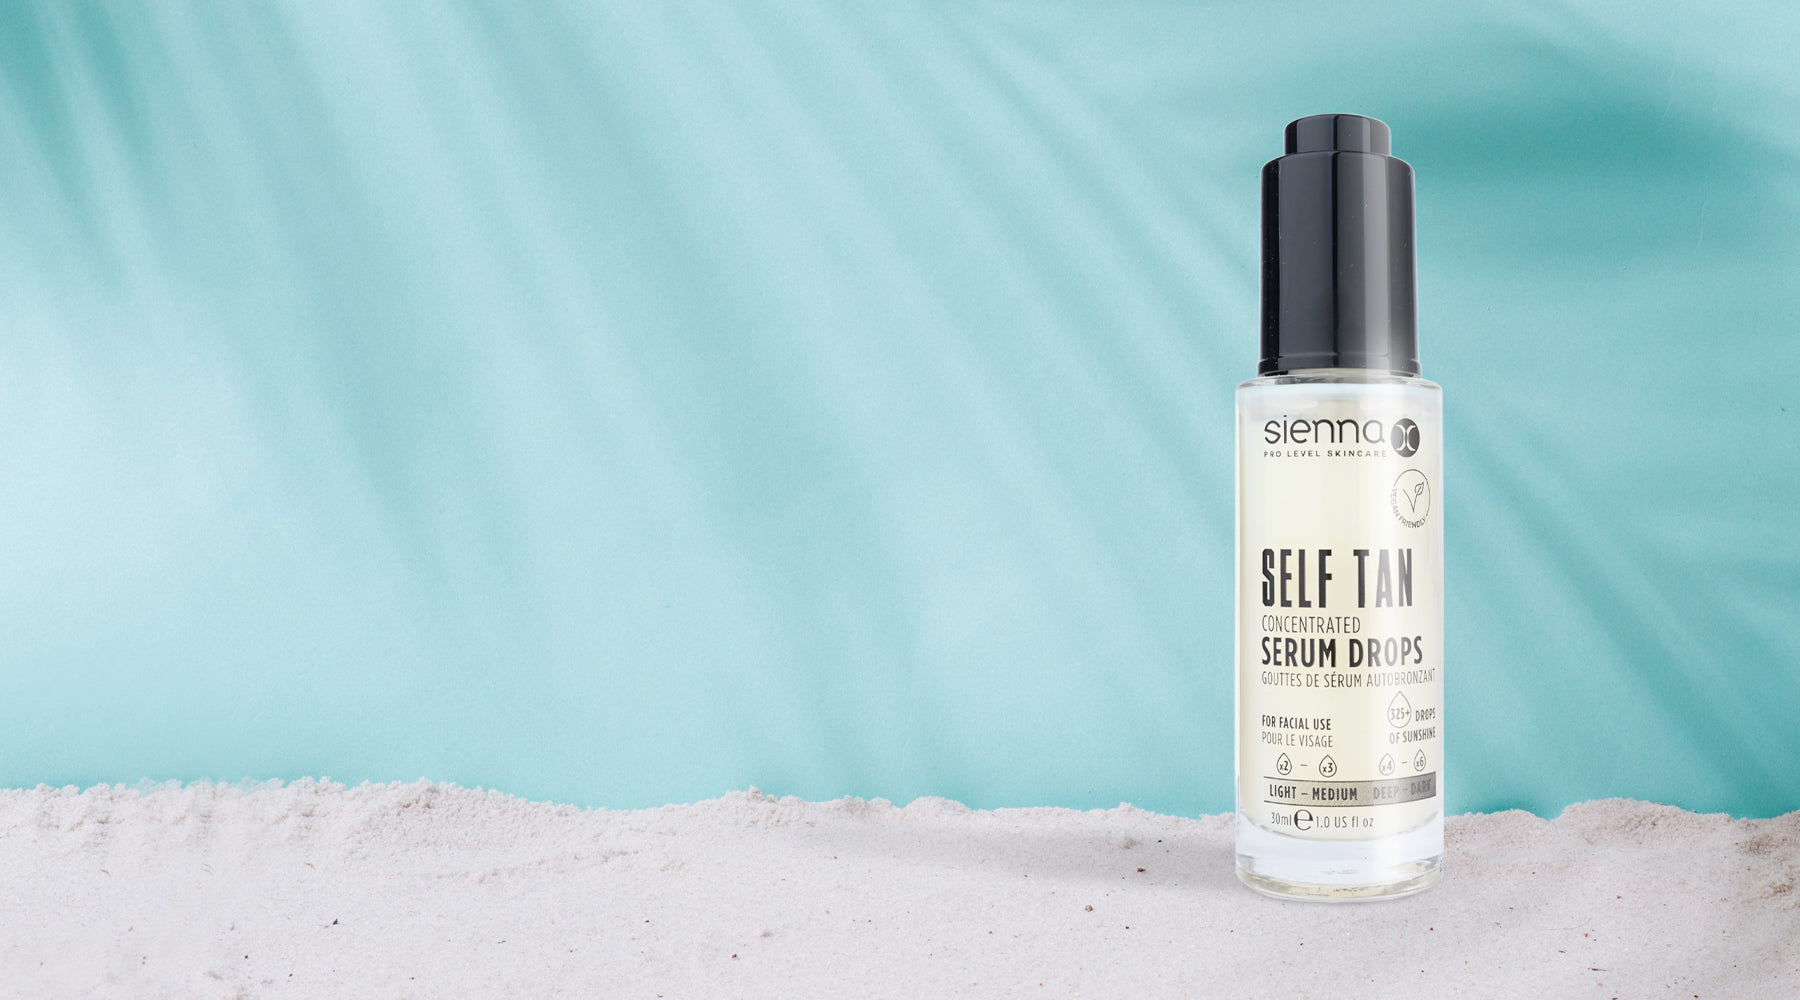 Meet our Self Tan Concentrated Serum Drops